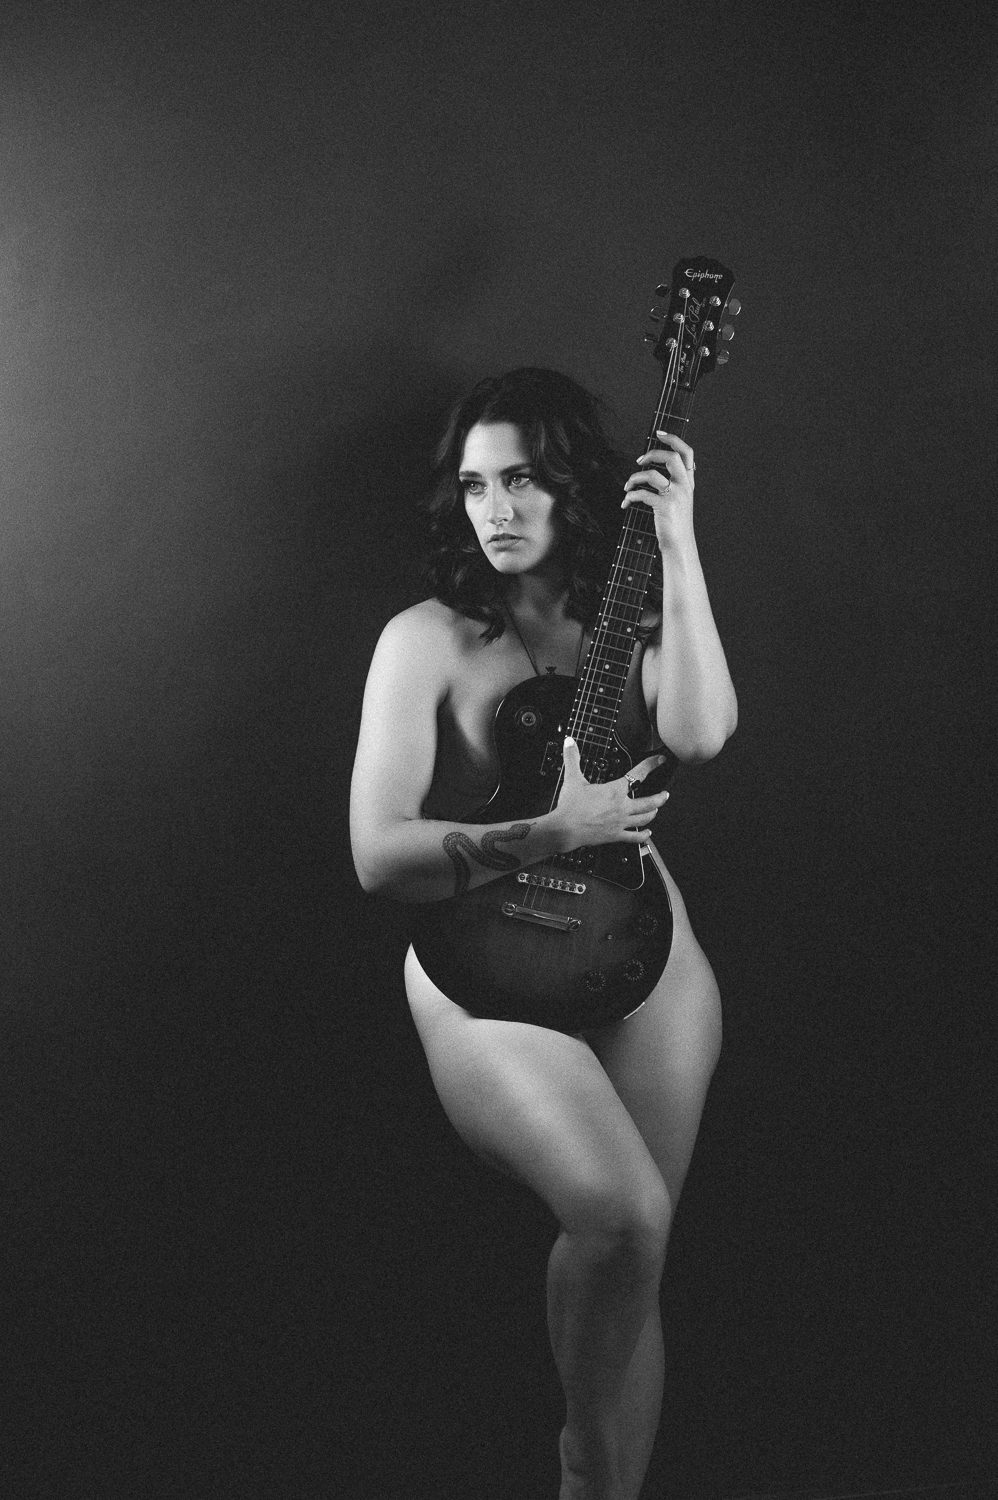 Use a guitar for implied topless photography.